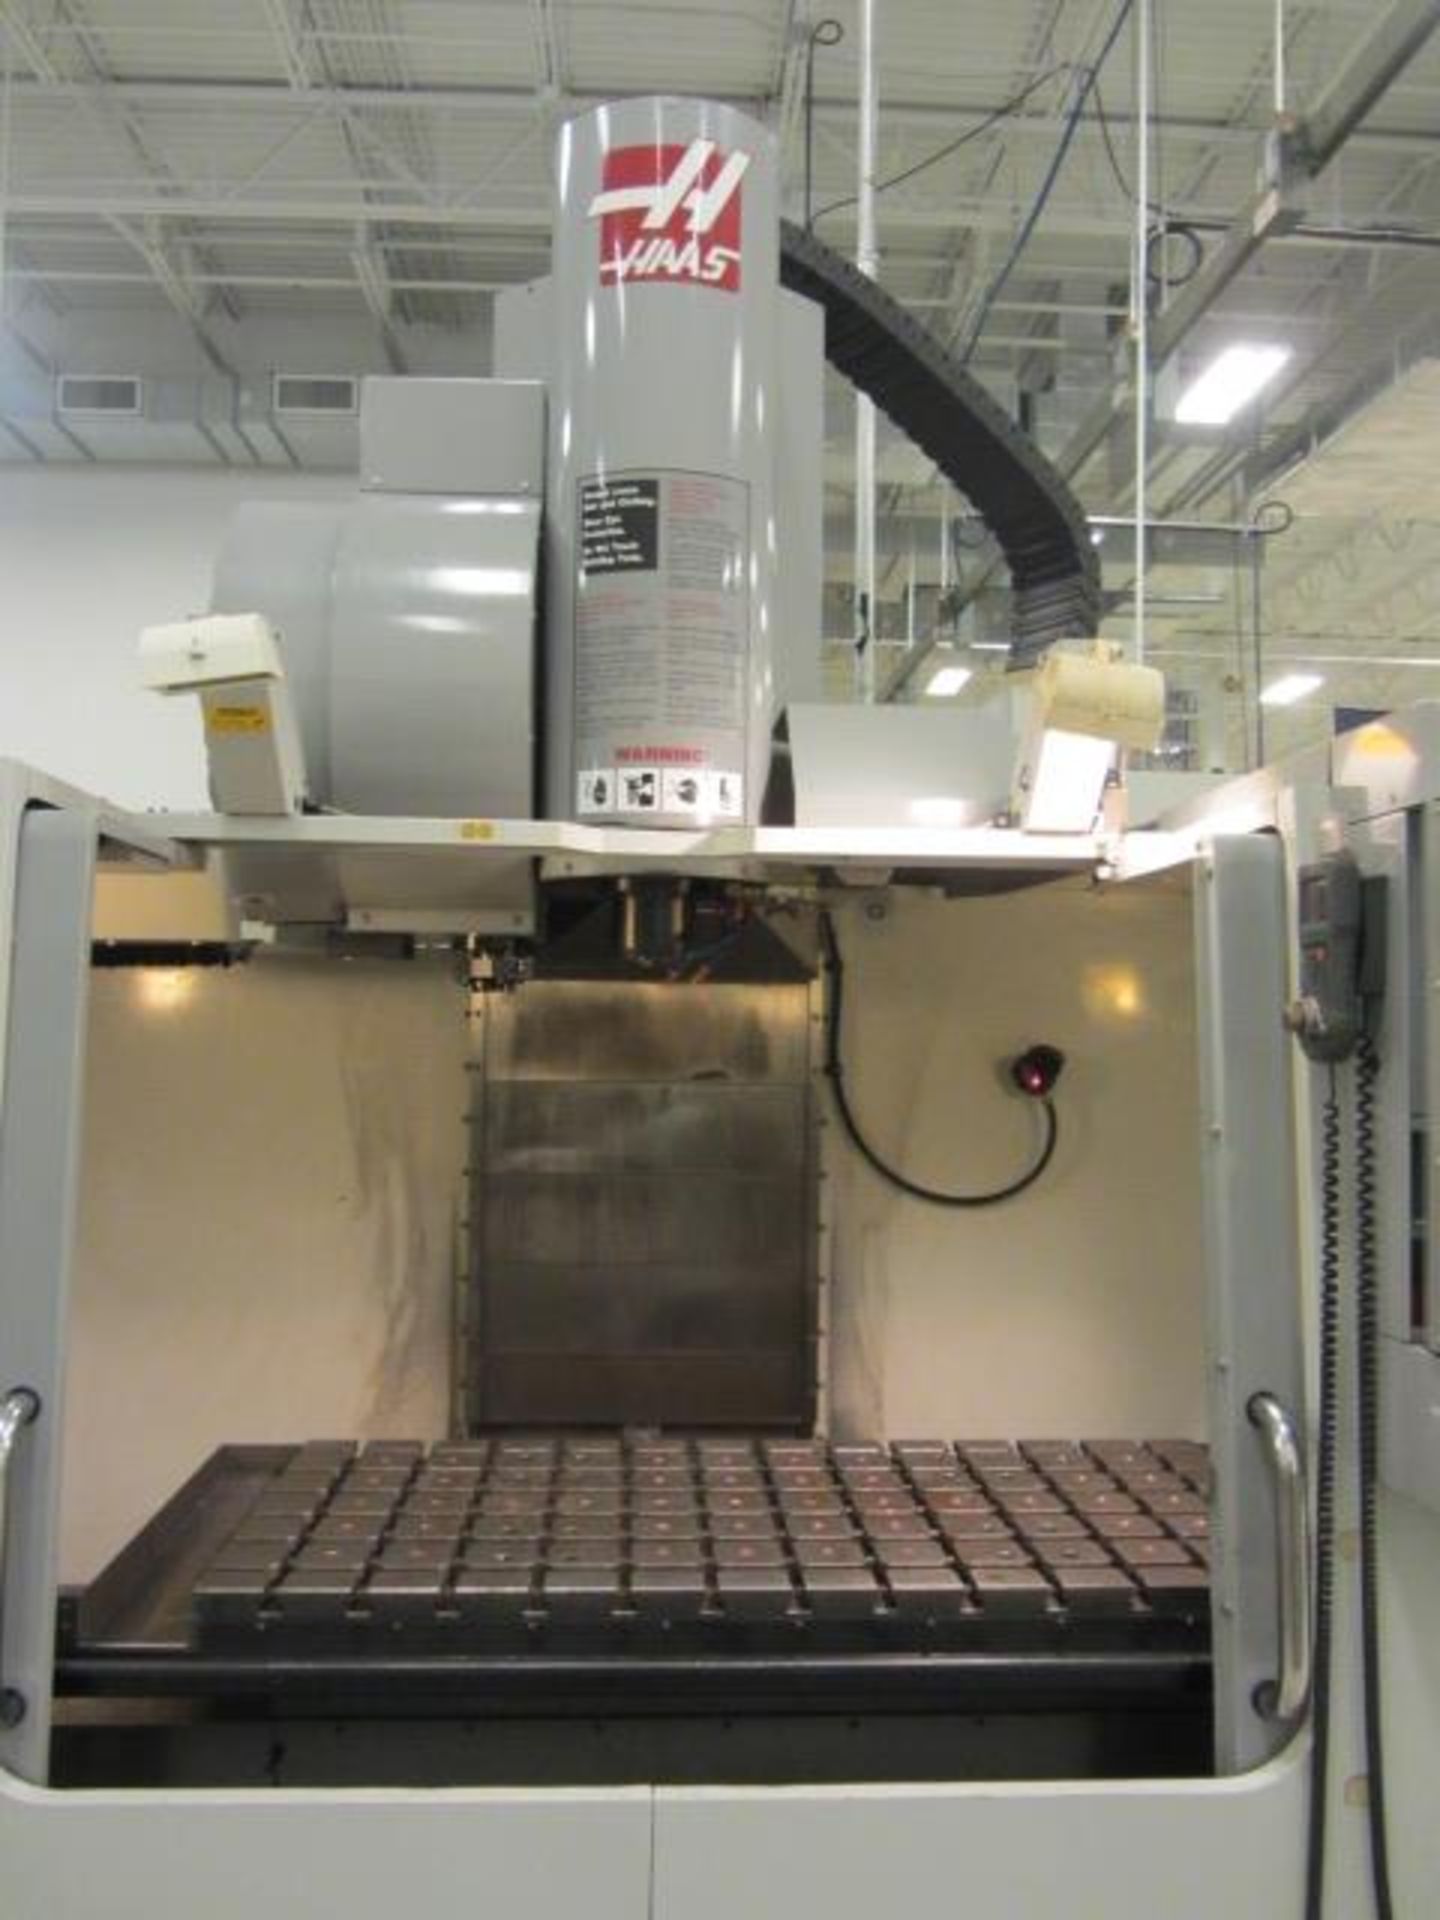 Haas VM-3 Mold Maker CNC Vertical Machining Center with 54'' x 24'' Table, #40 Taper Spindle - Image 4 of 10